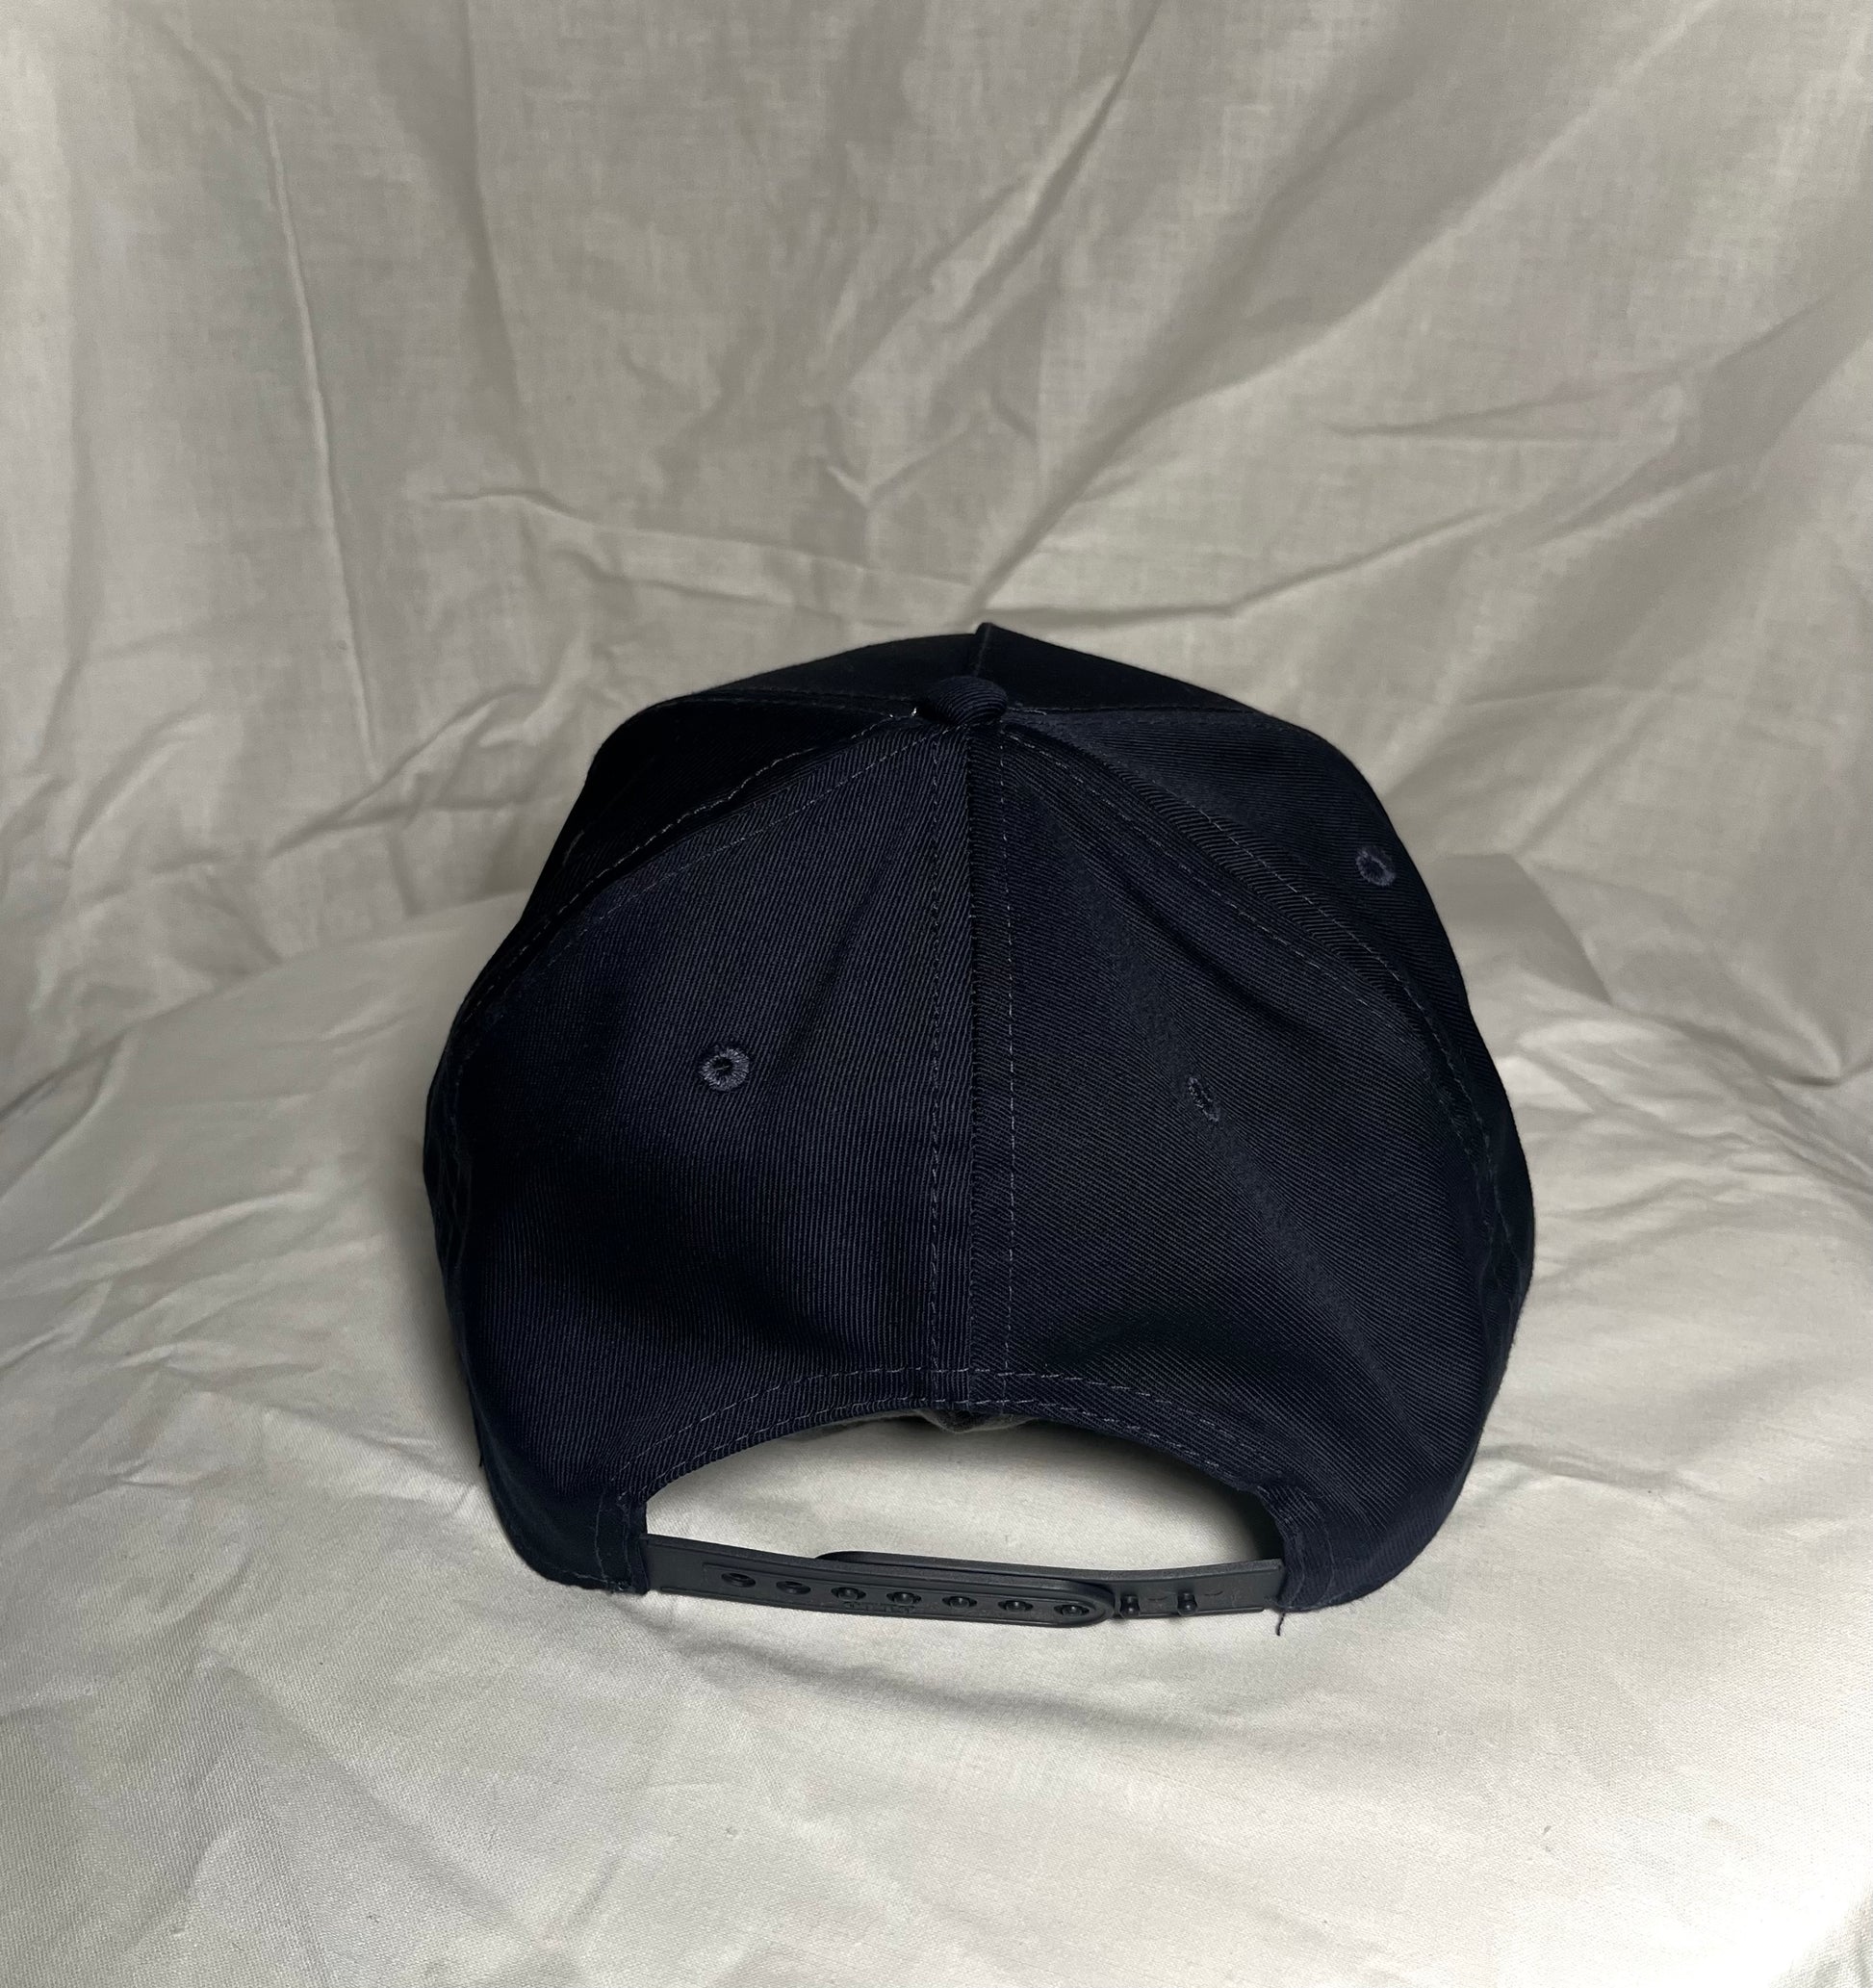 Back view of Navy Blue SnapBack With White Extra Credit Logo puff embroidered across front panel